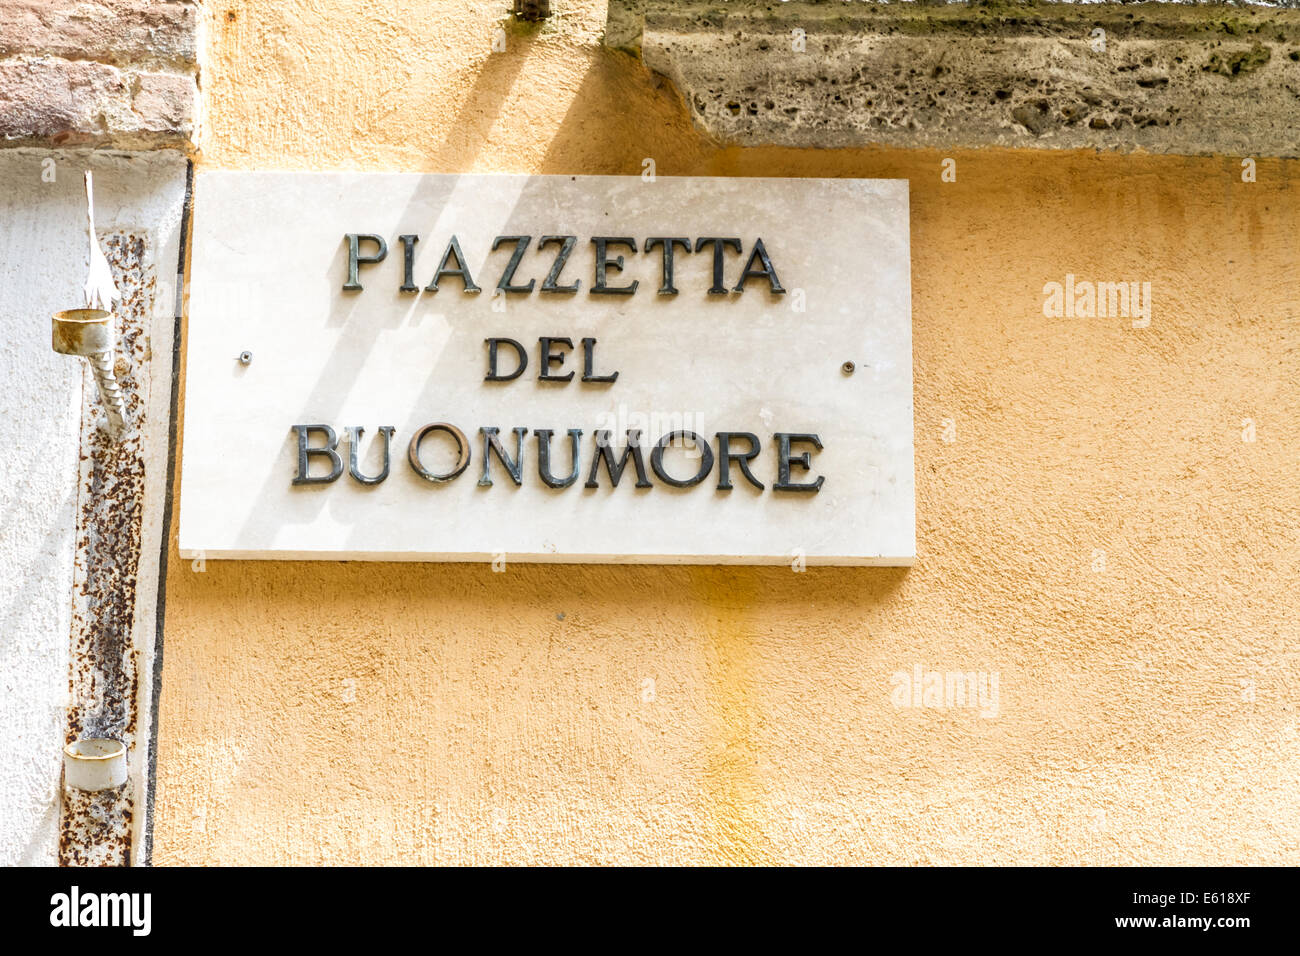 'Piazzetta del buonumore' means 'good mood place' in Italian. Road sign in Montepulciano, Tuscany Stock Photo